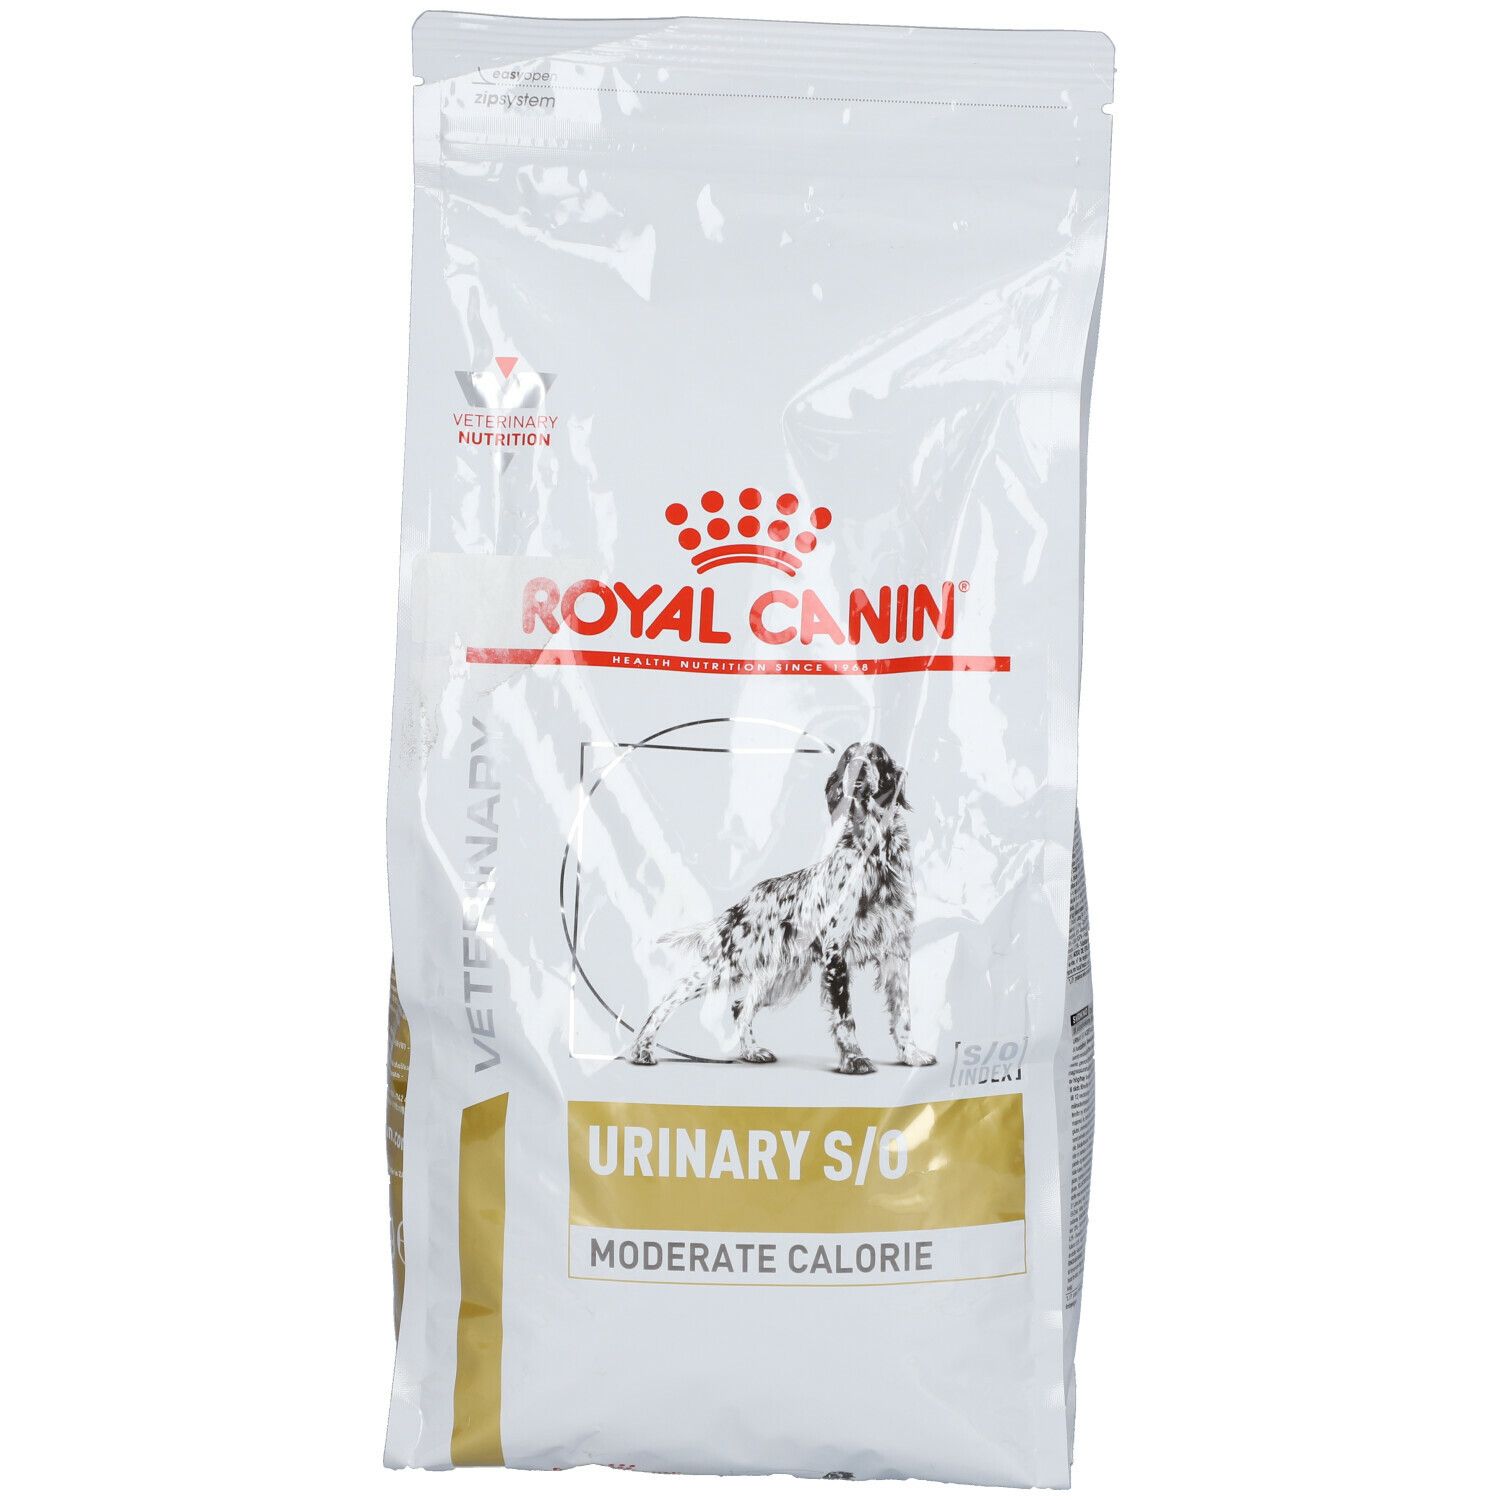 Royal Canin® Veterinary Canine Urinary S/O Moderate Calorie